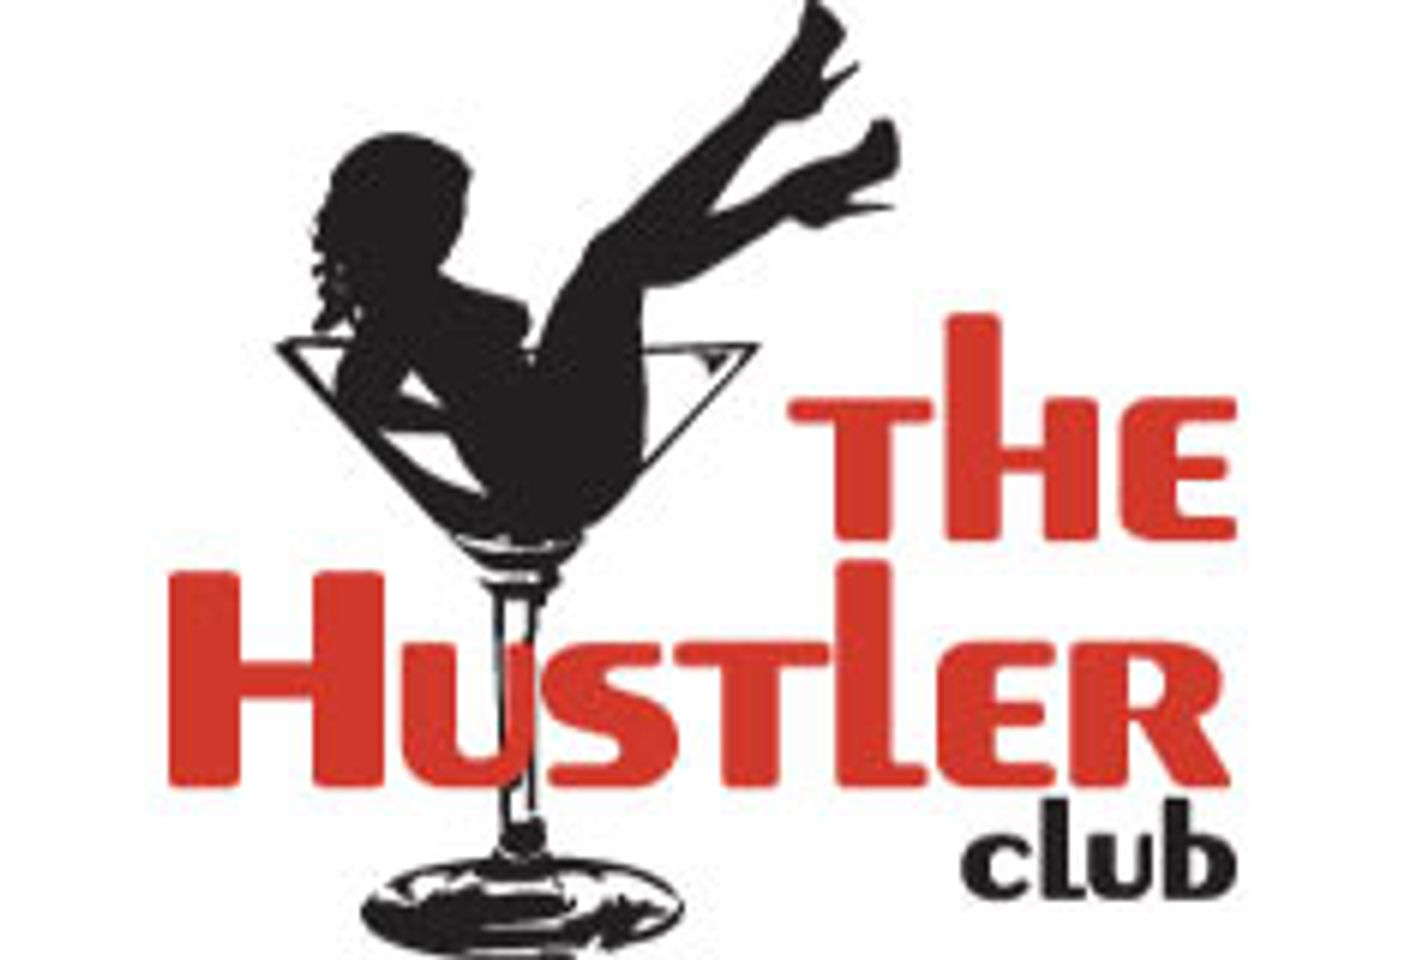 New Hustler Club Allowed to Open, with Restrictions